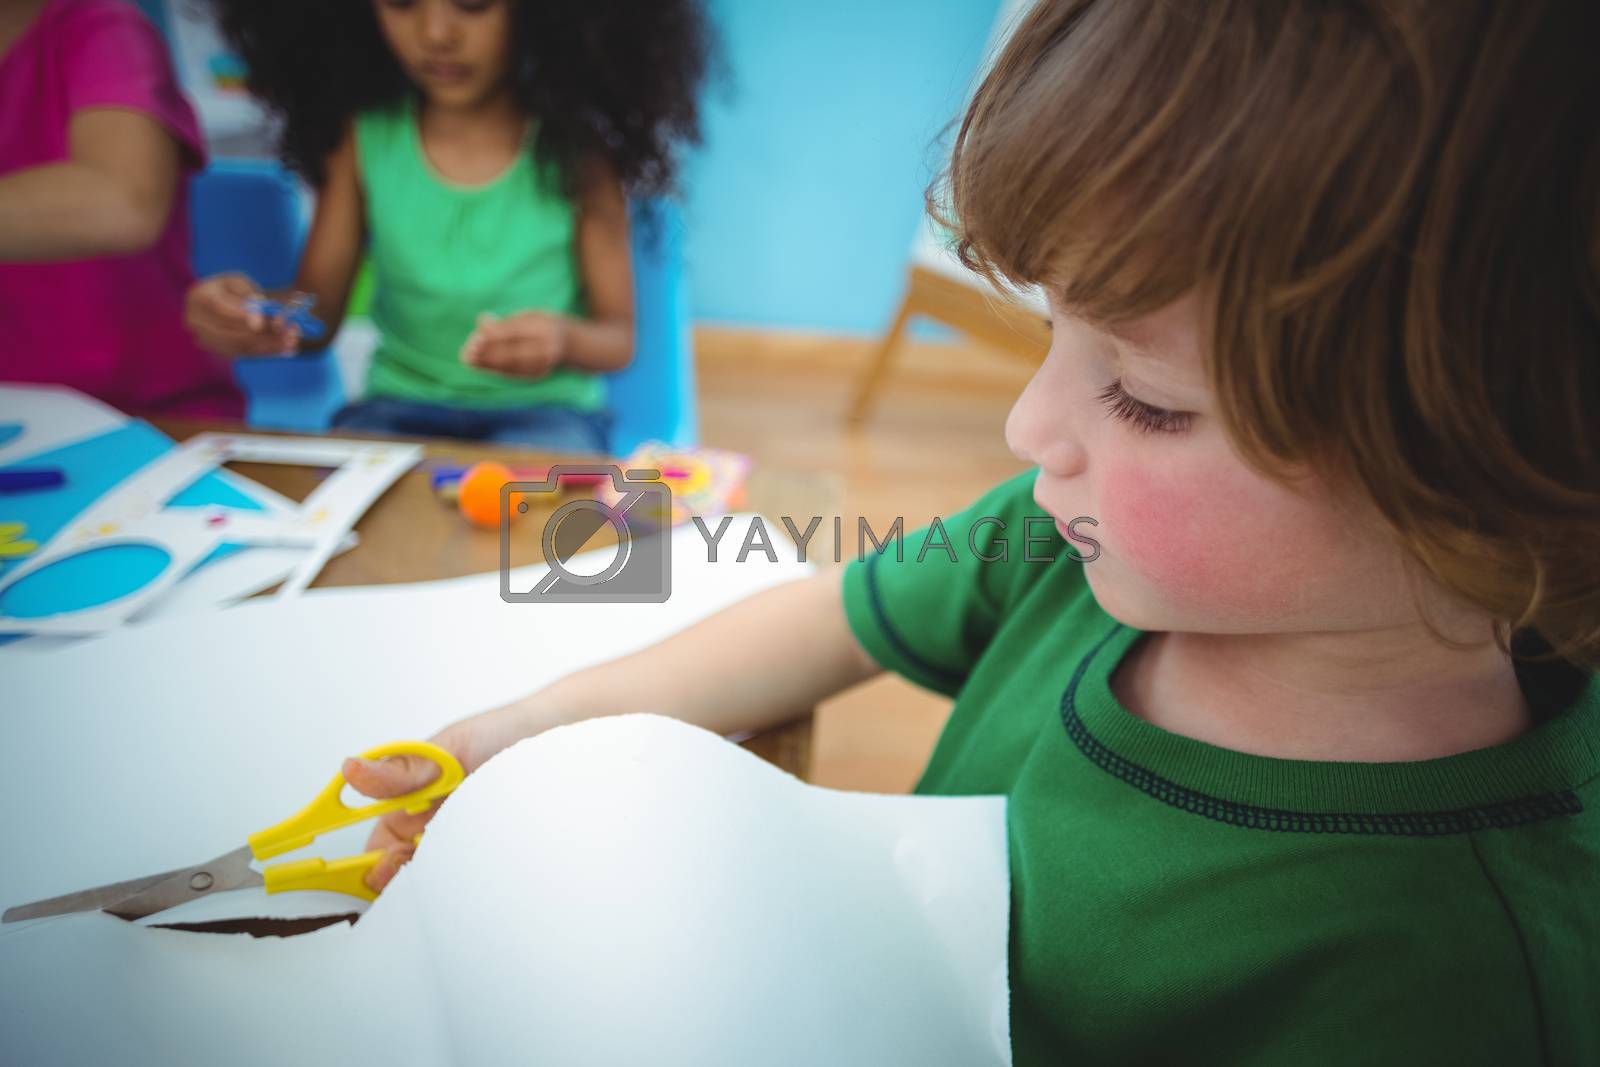 Royalty free image of Happy kids doing arts and crafts together by Wavebreakmedia